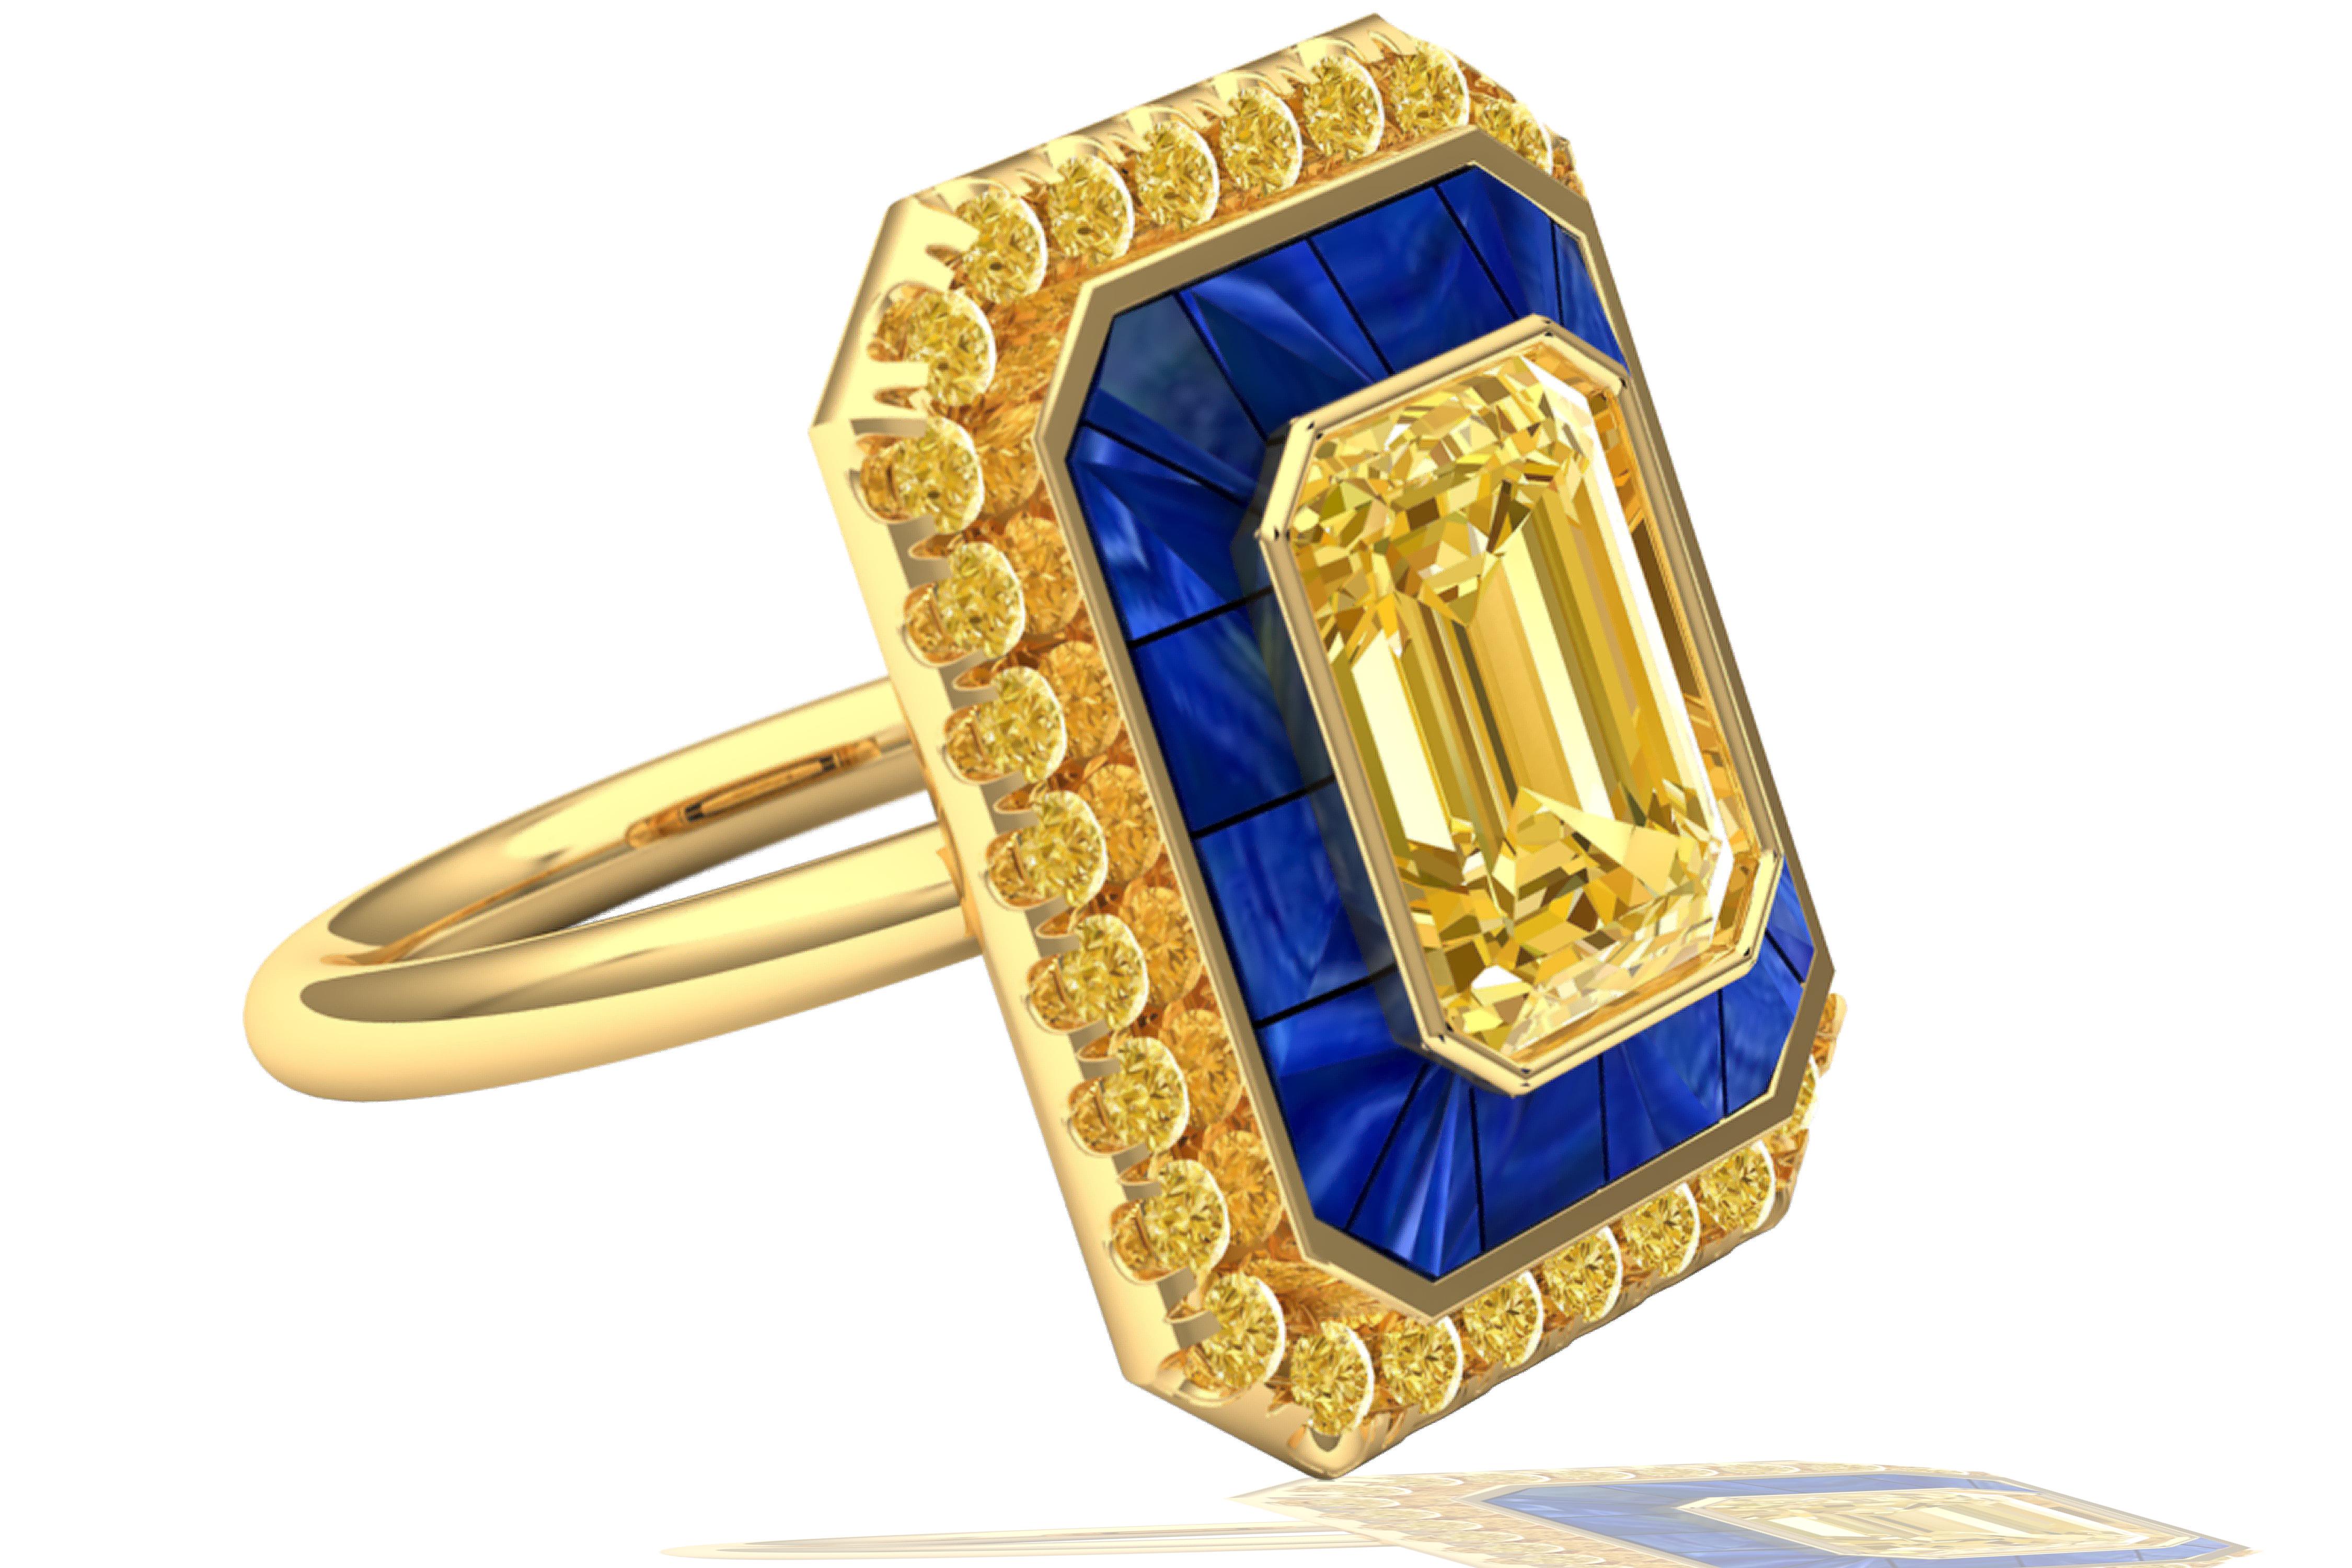 A perfect combination of rich golden yellow and royal blue is complimented by white stunning diamonds.  The center stone is just over 2.3 carats and has an almost diamond like appearance because of its clarity and the color saturation.  The center